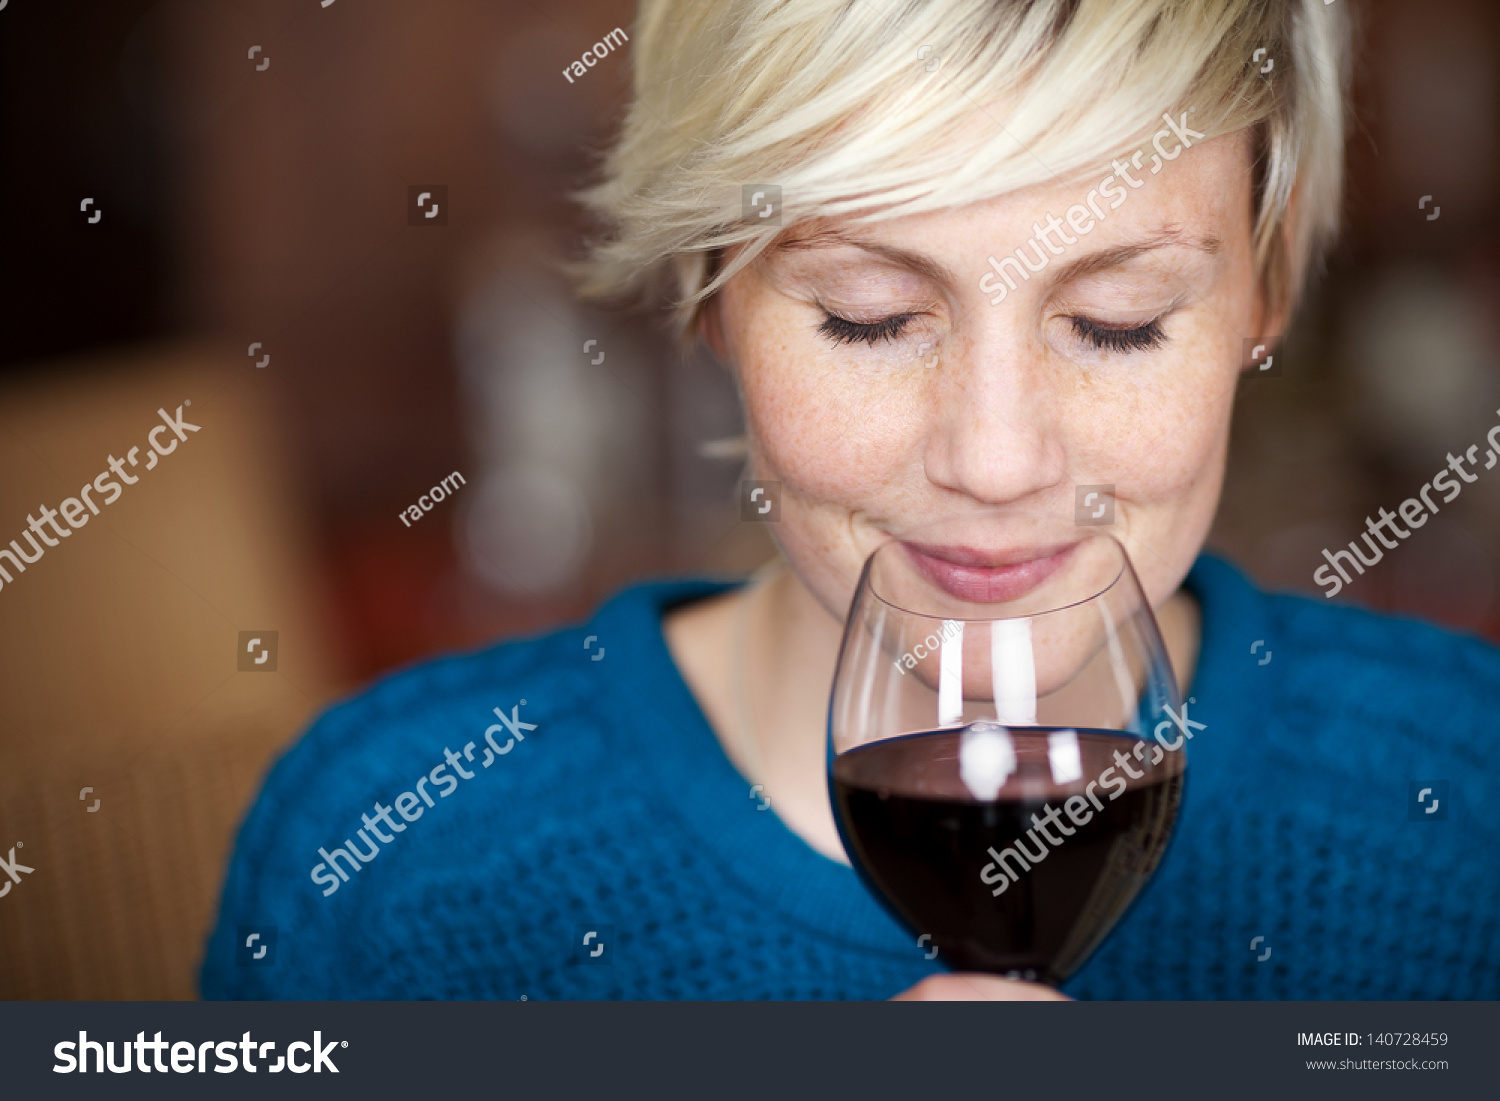 Closeup portrait of young female customer drinking red wine with eyes closed #140728459